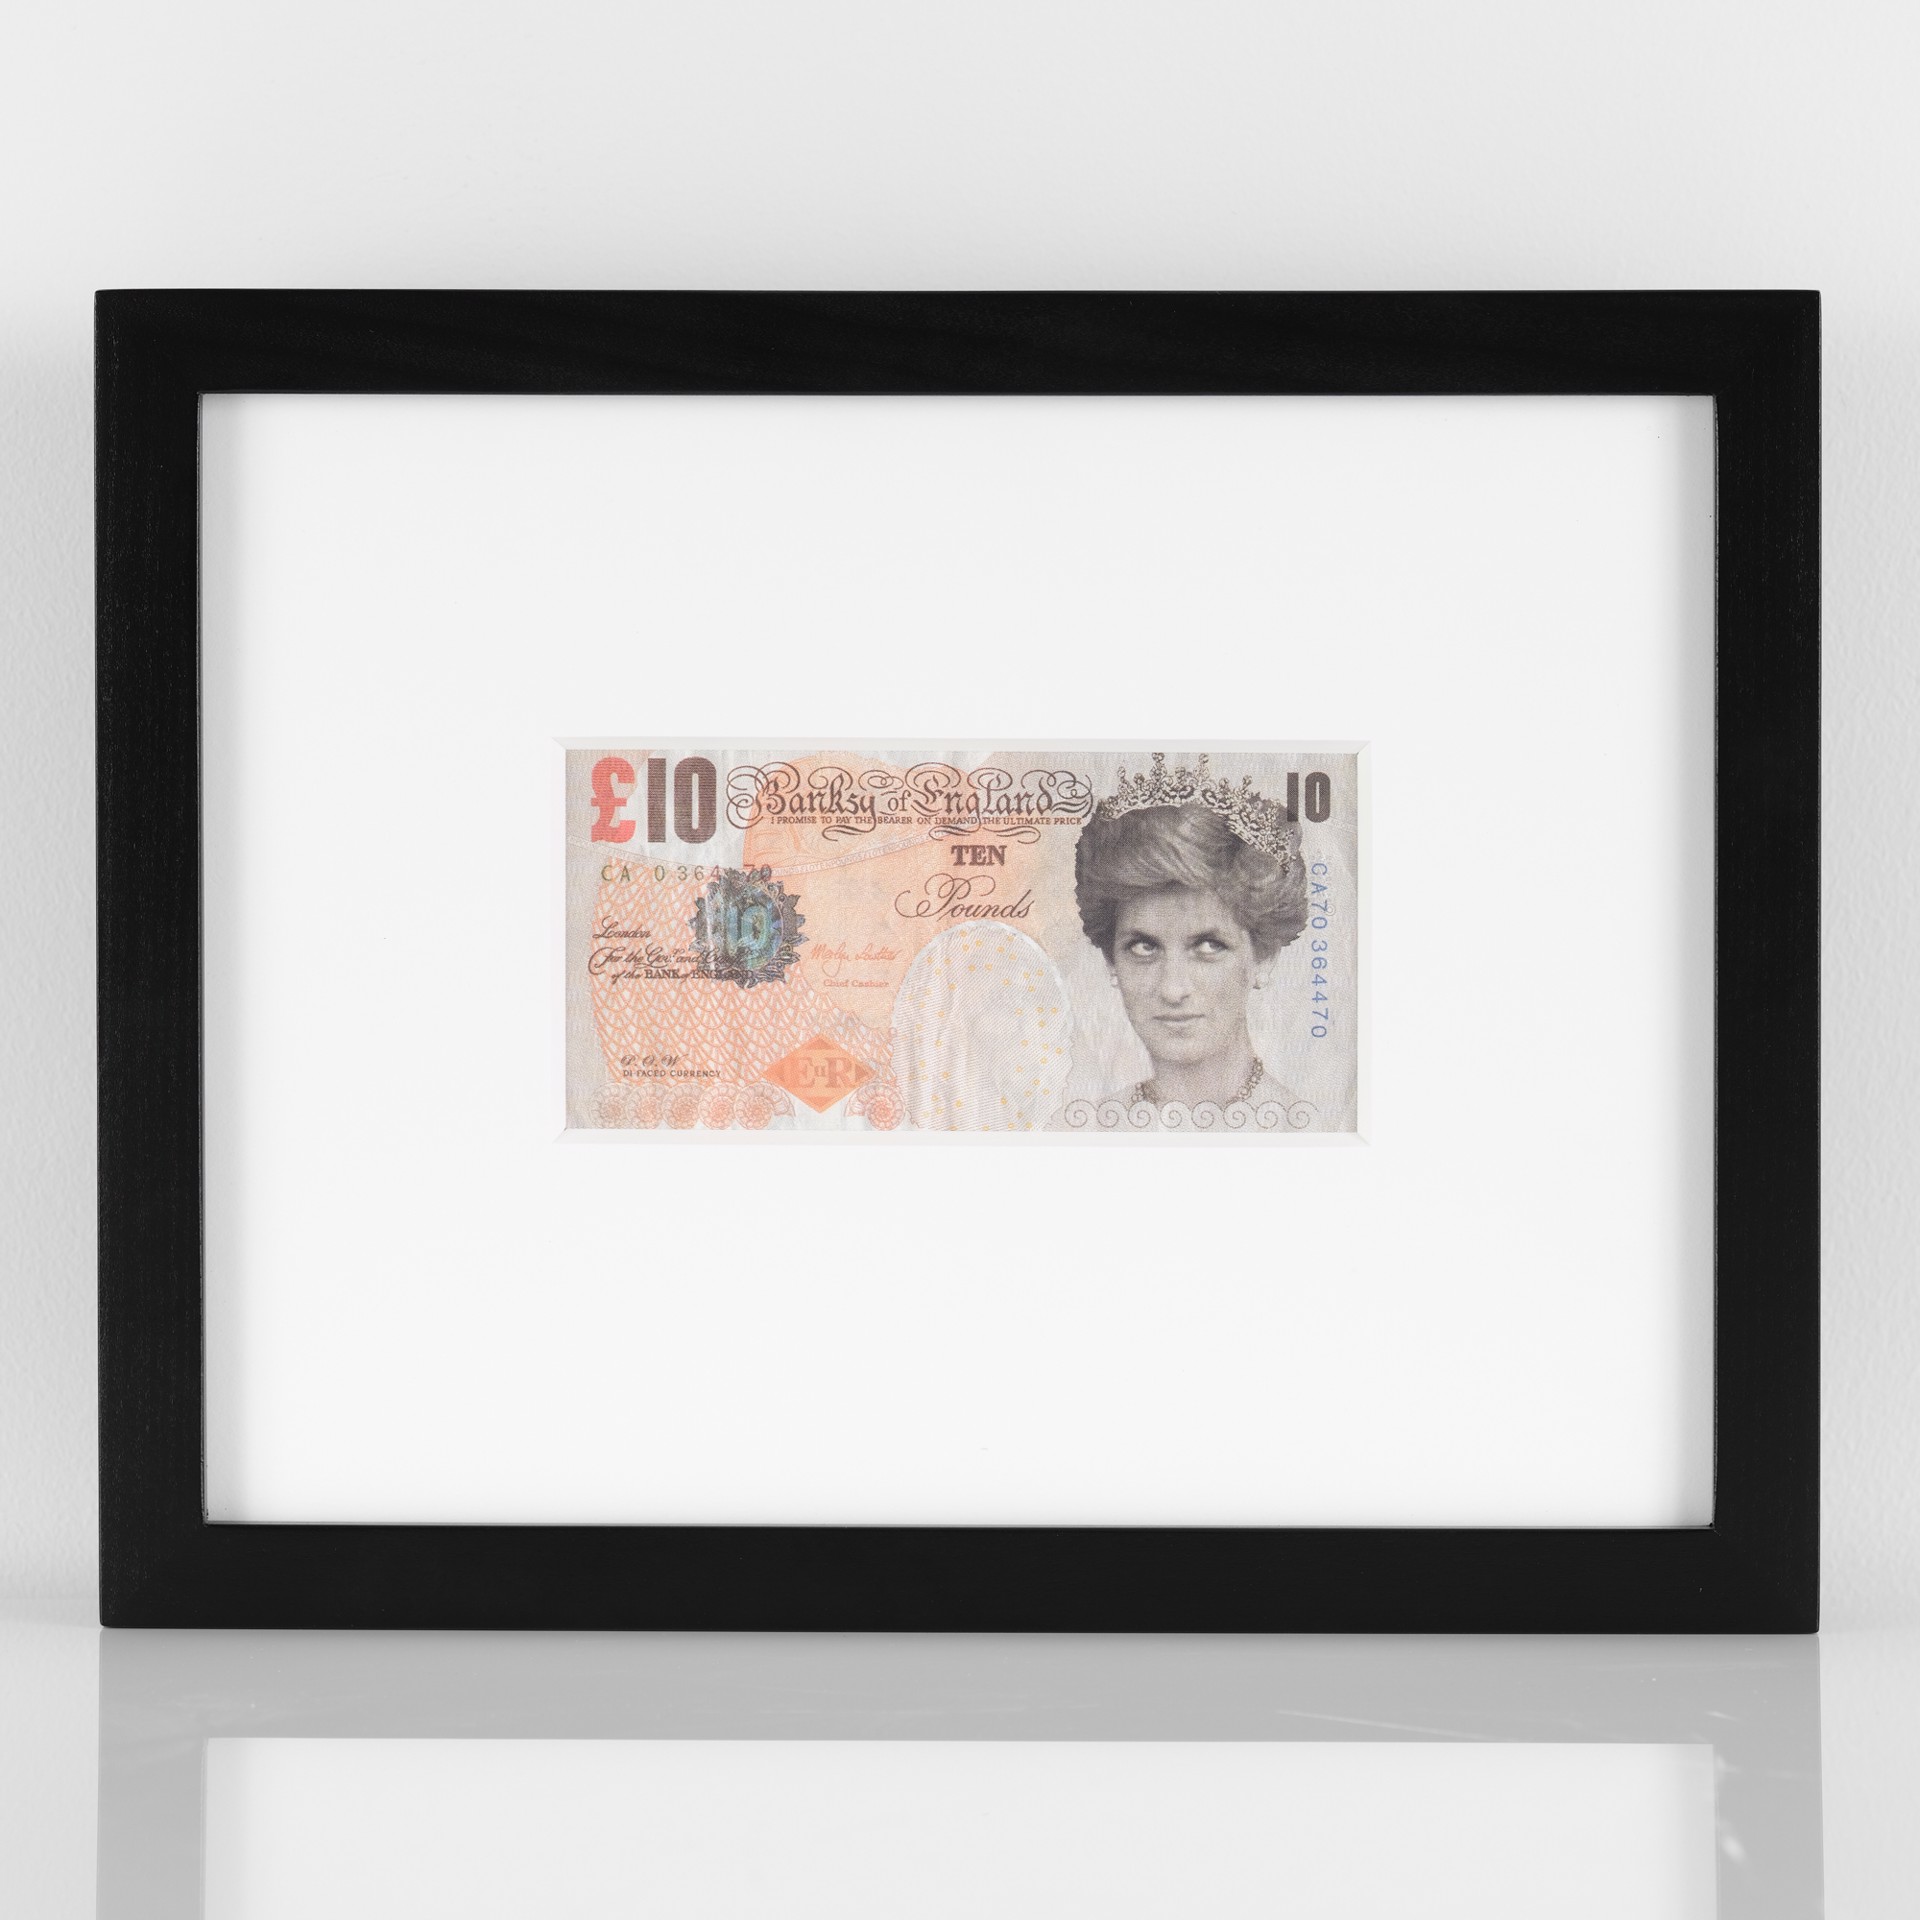 Di-Faced Tenner by Banksy